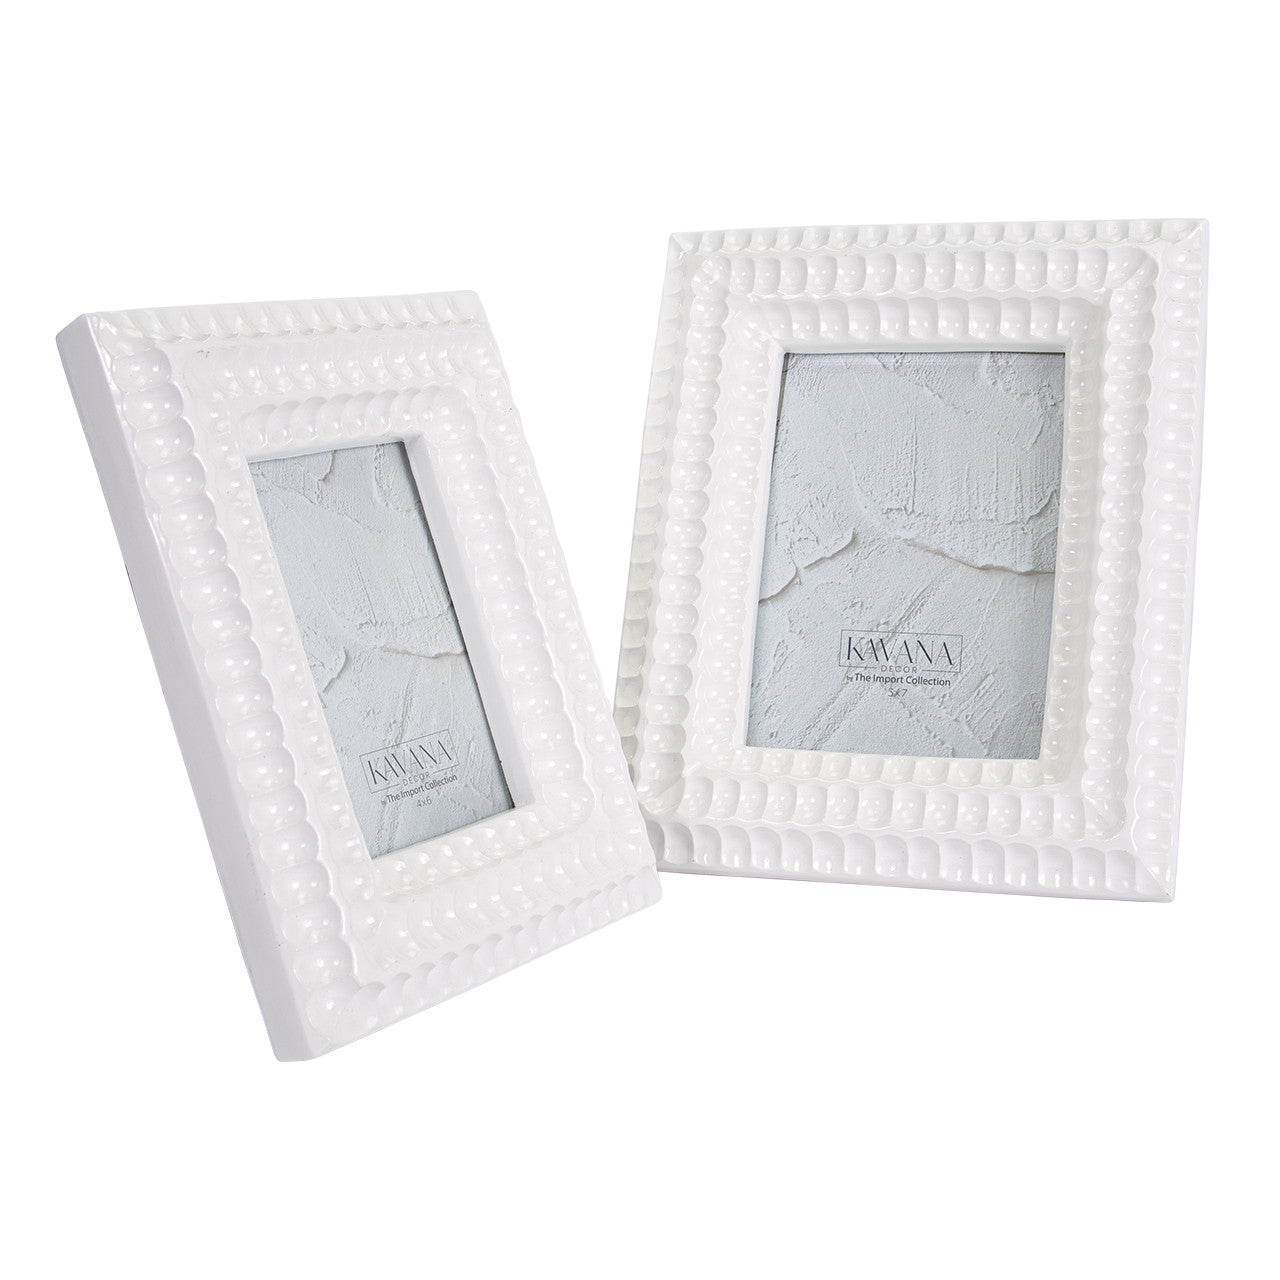 The Ros White Picture Frame in 2 sizes